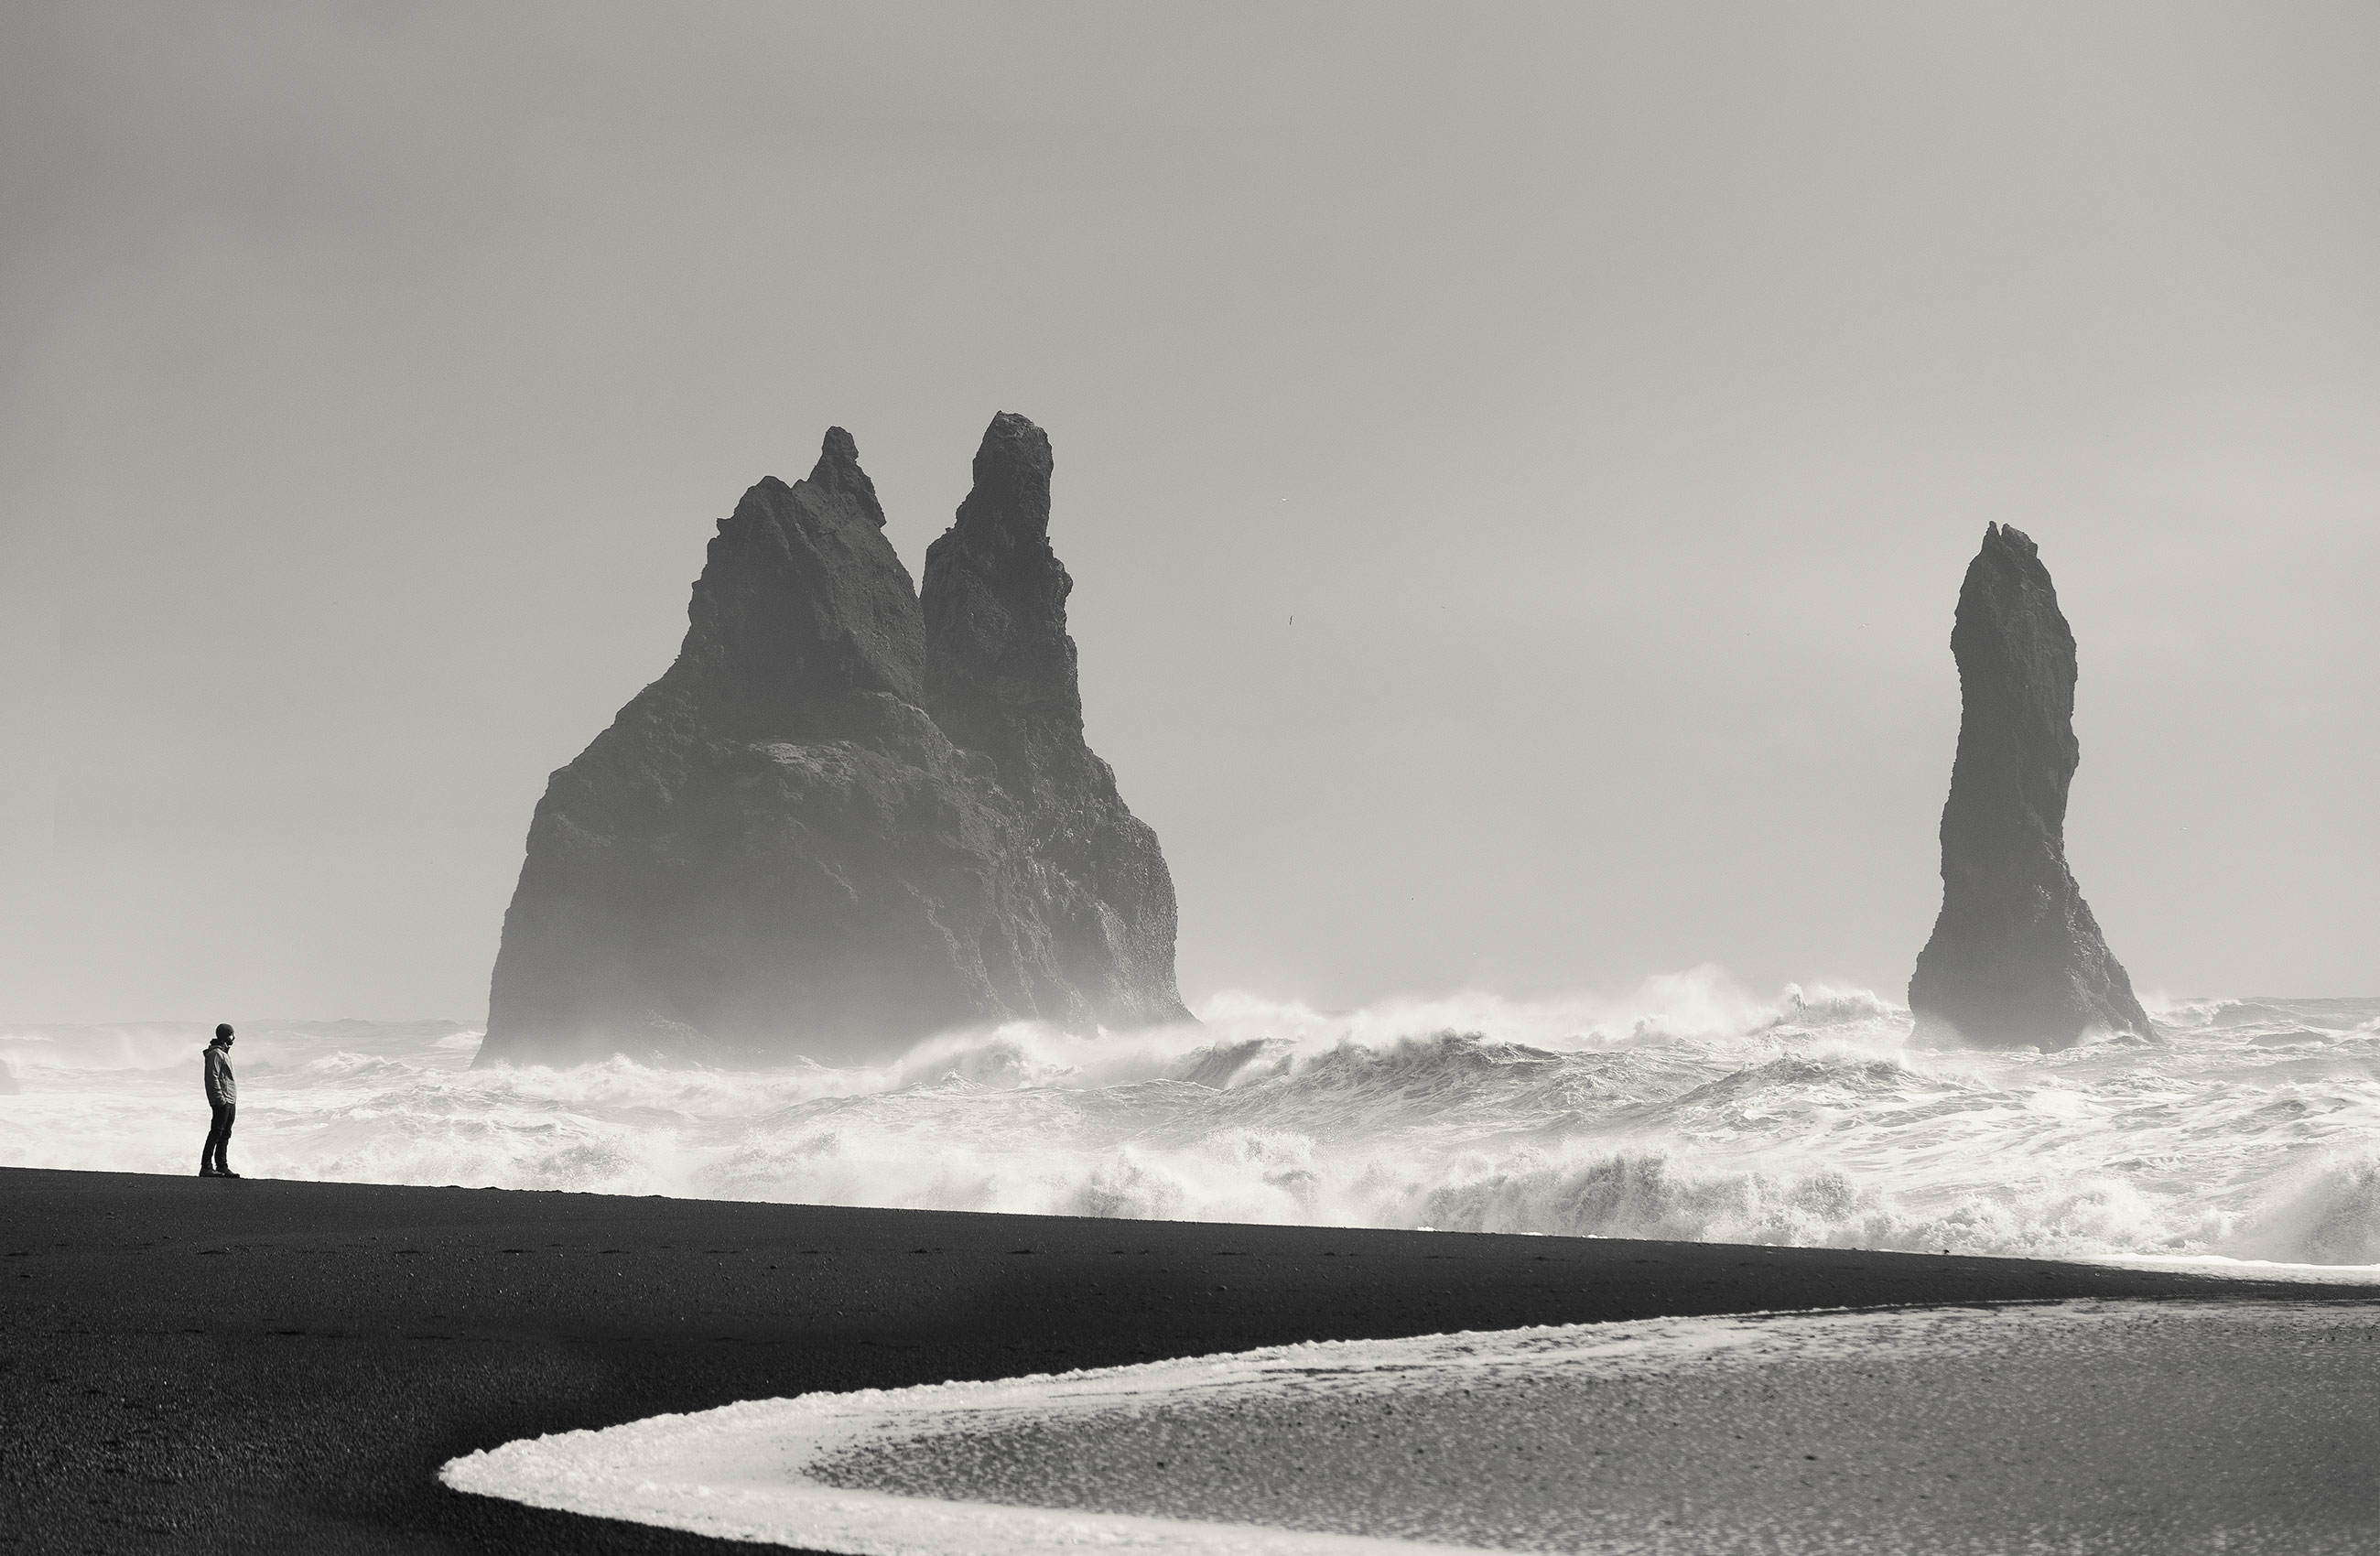 Never turn your back on the waves at Reynisfjara beach Iceland